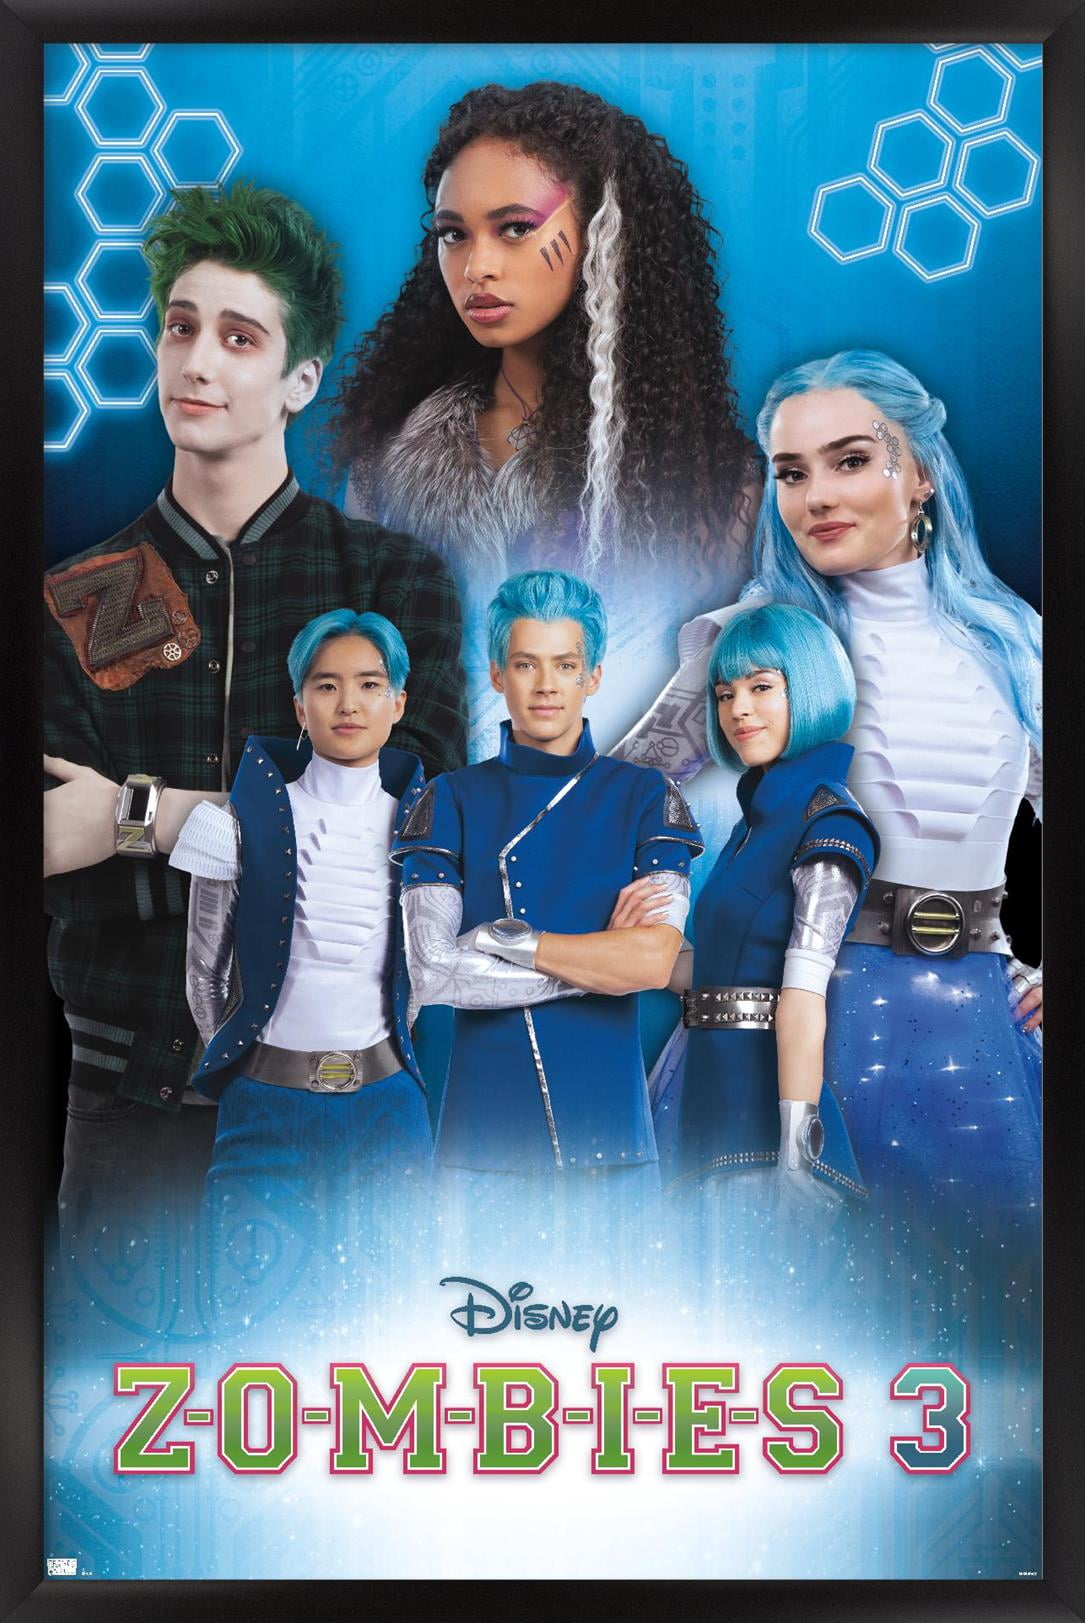 Disney Descendants 3 - Grid Wall Poster with Push Pins, 22.375 x 34 